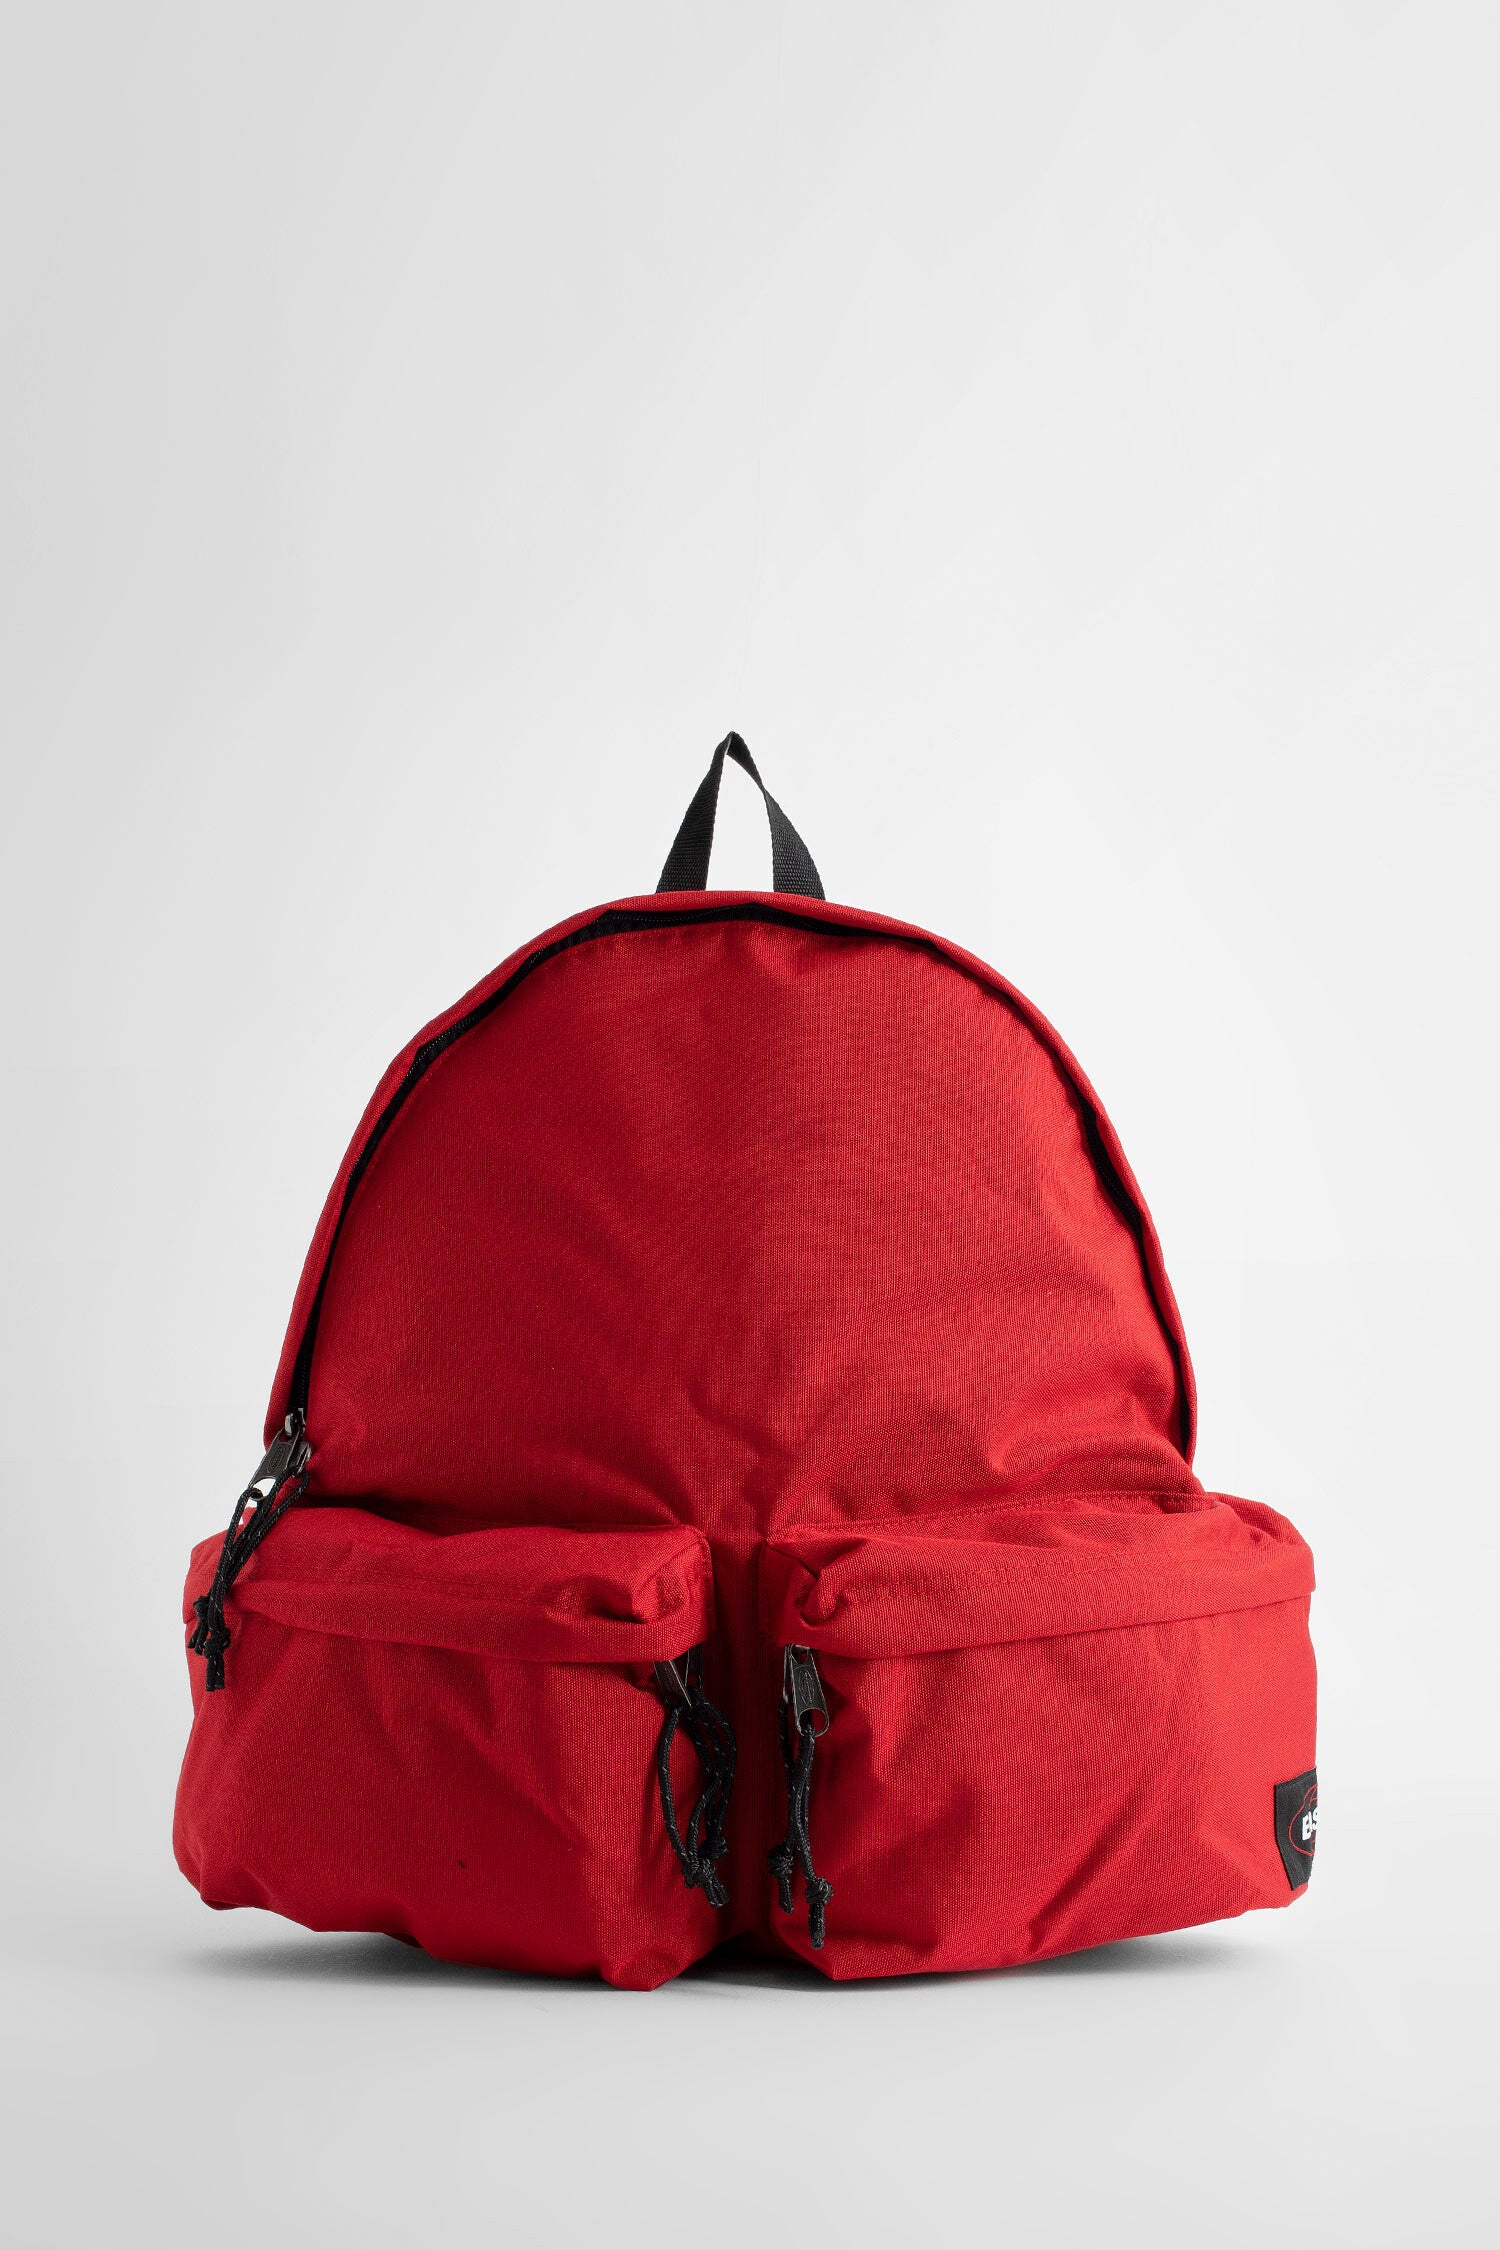 UNDERCOVER MAN RED BACKPACKS & TRAVEL BAGS